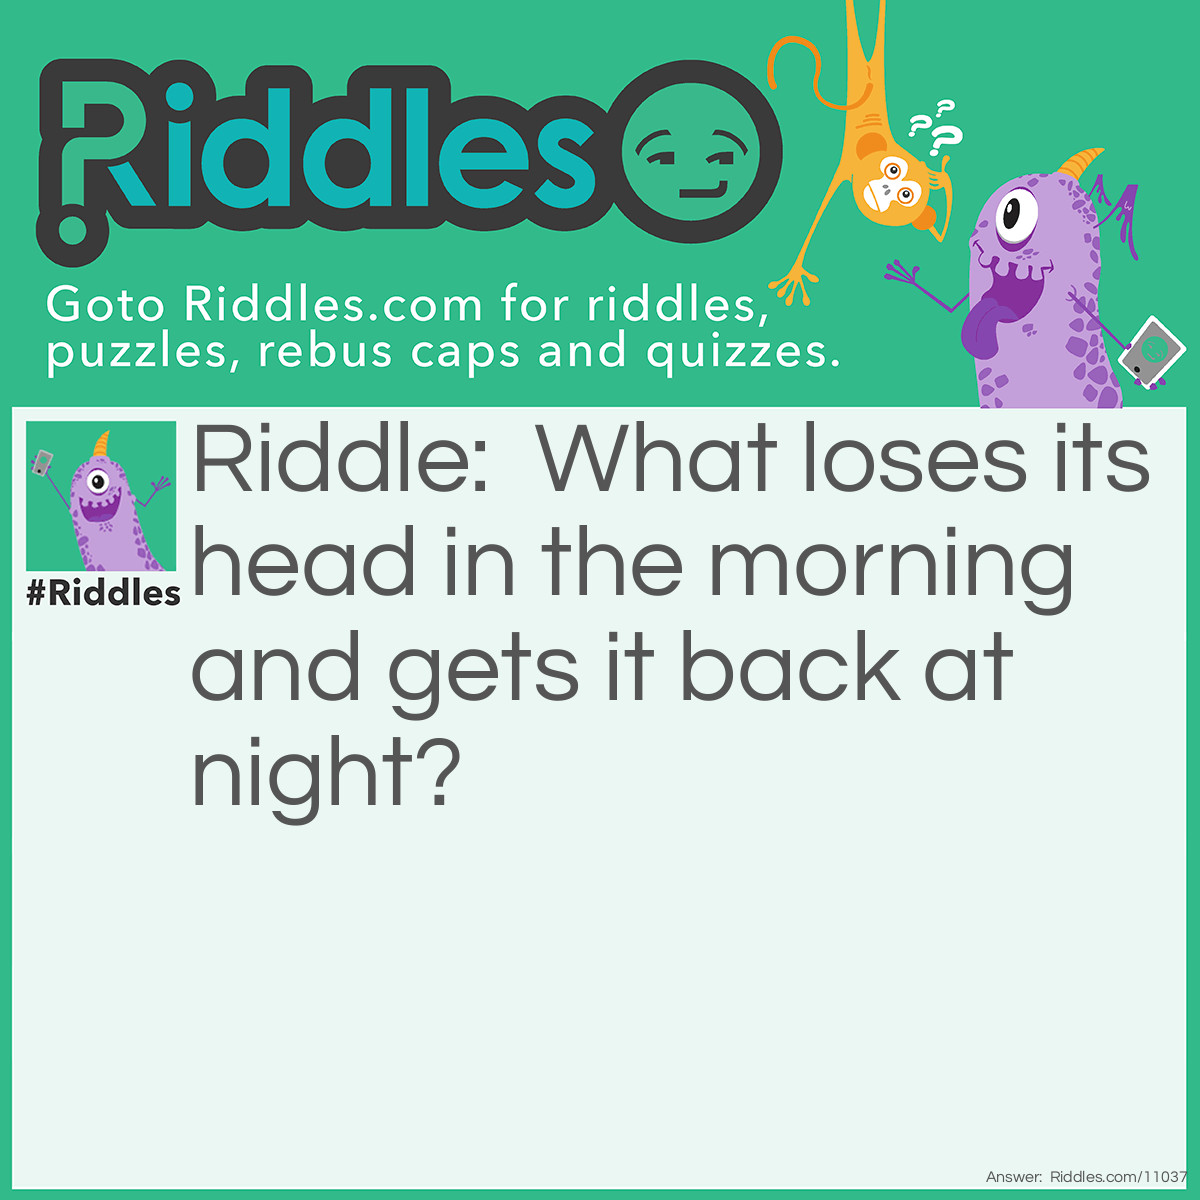 Riddle: What loses its head in the morning and gets it back at night? Answer: A pillow.